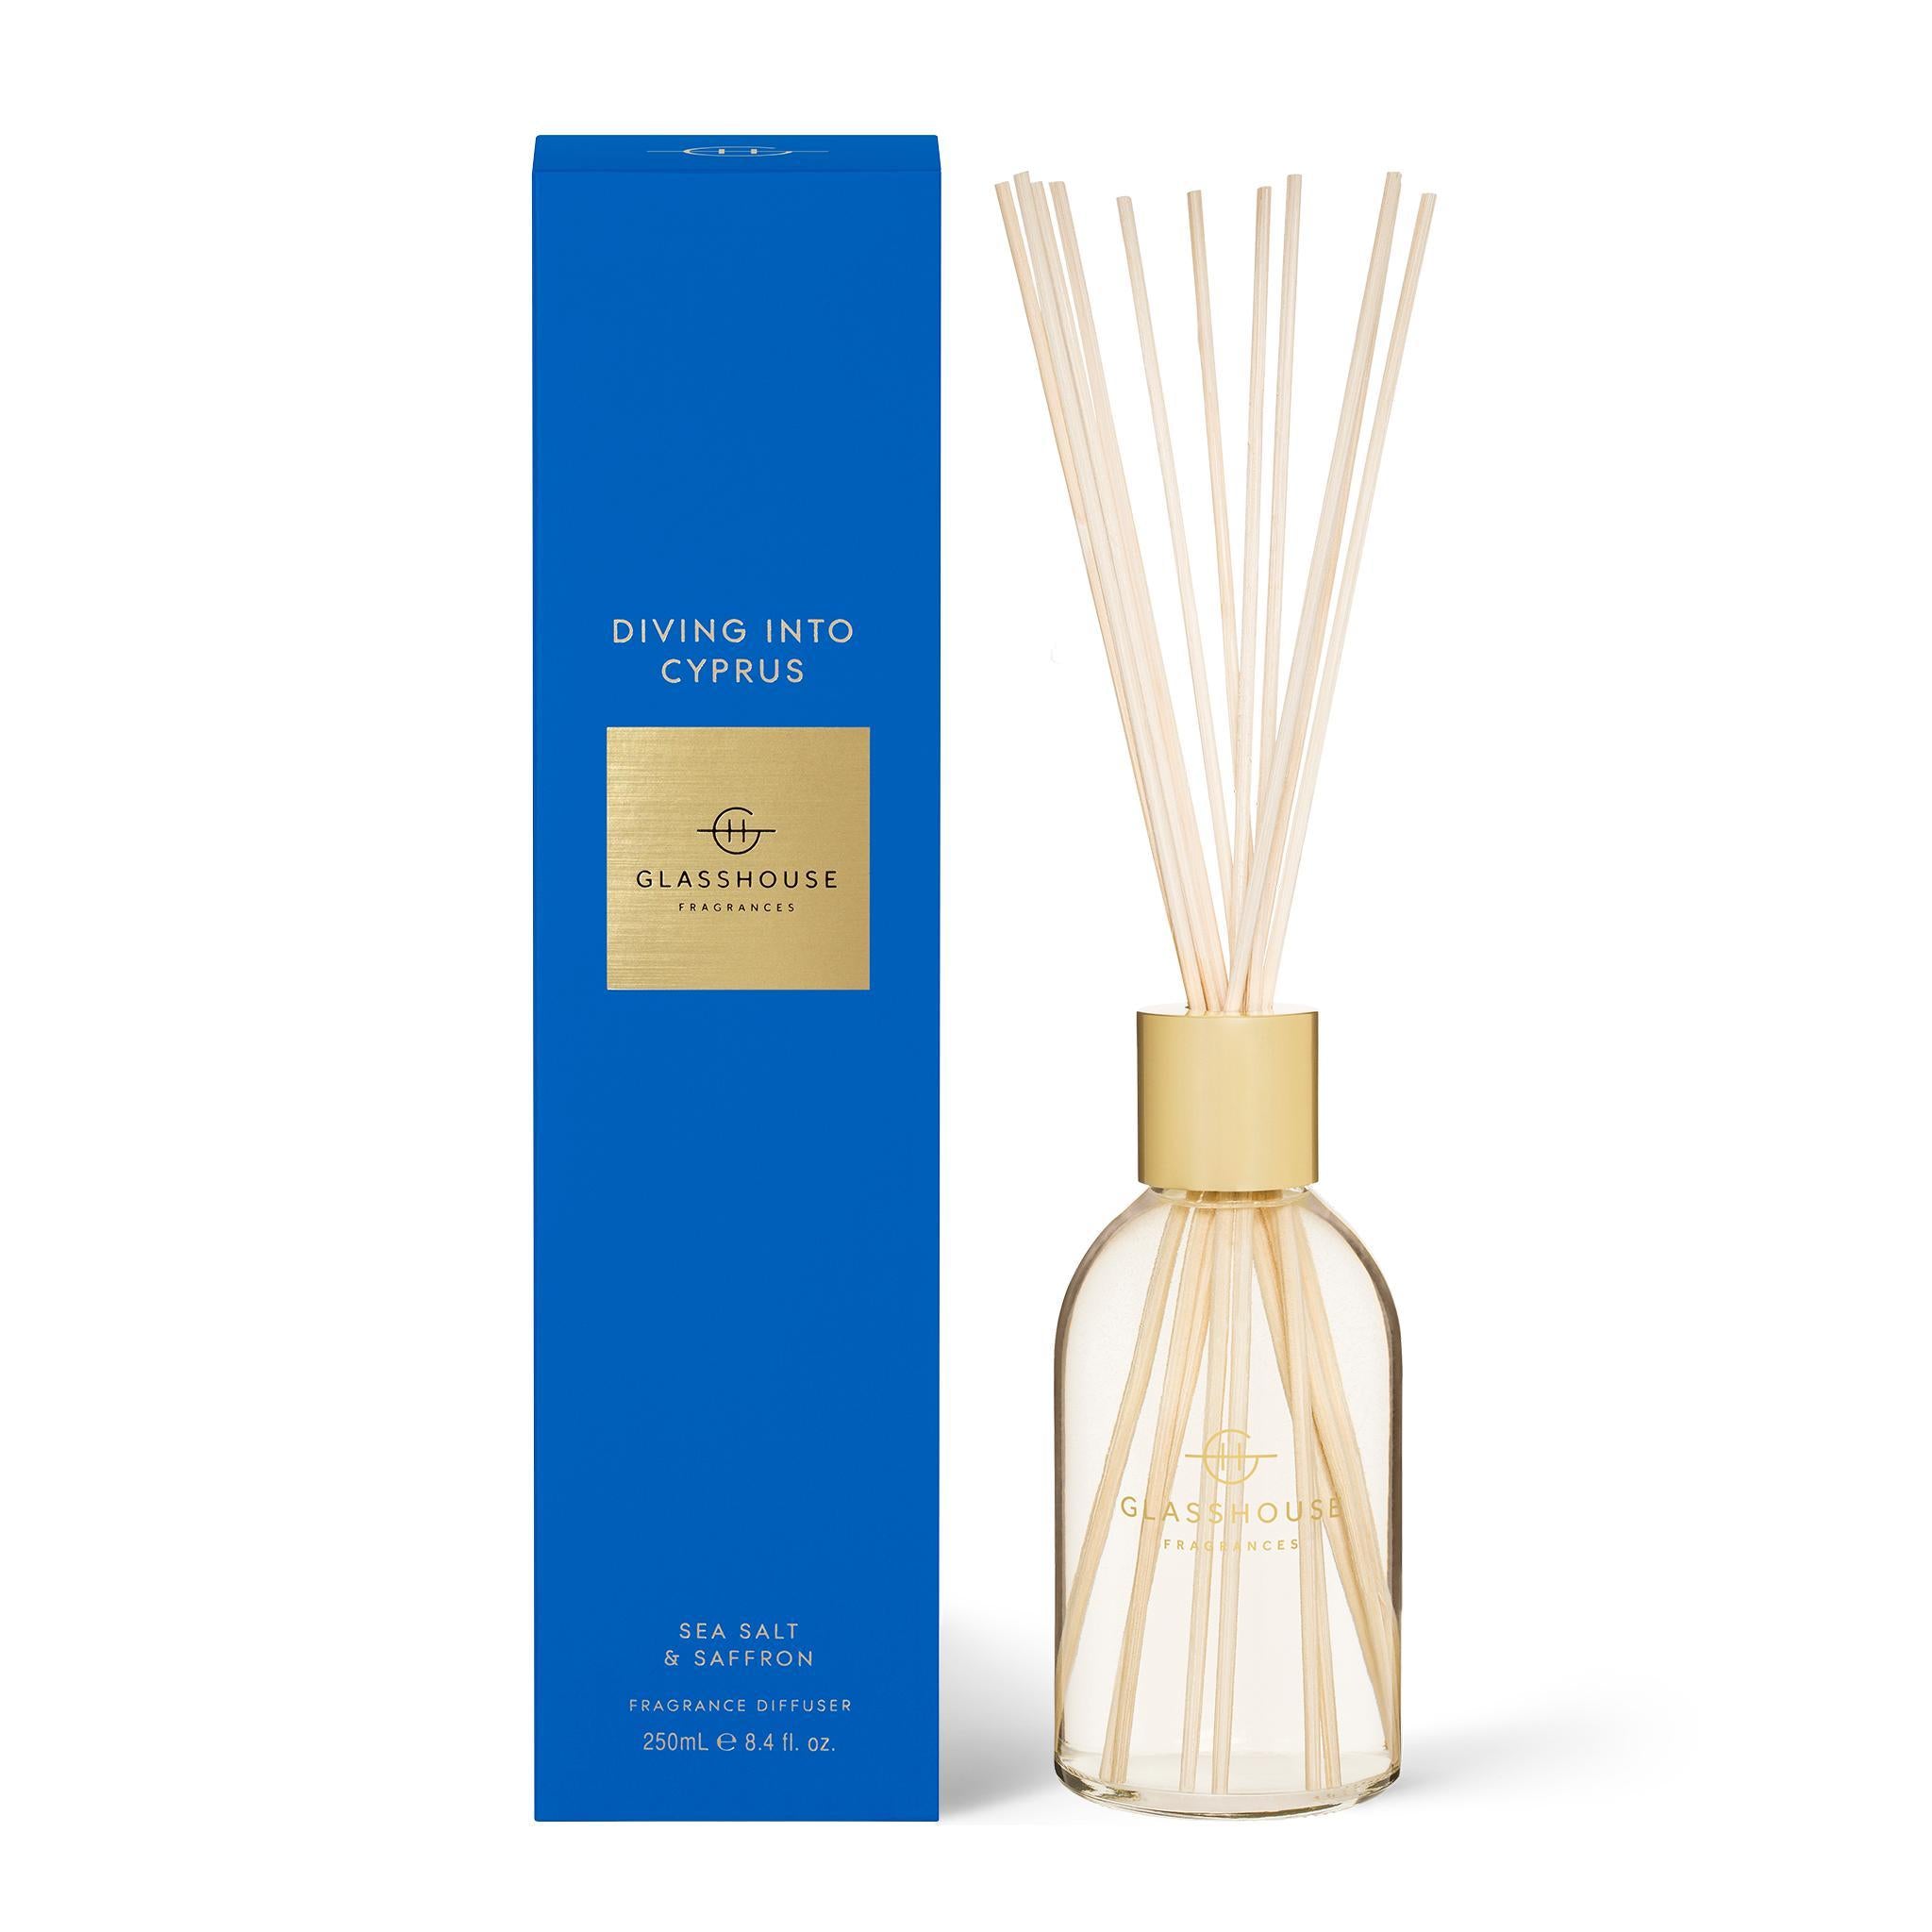 250mL Fragrance Diffuser - Asst Fragrances-Candles & Fragrance-Glasshouse-Diving Into Cyprus-The Bay Room